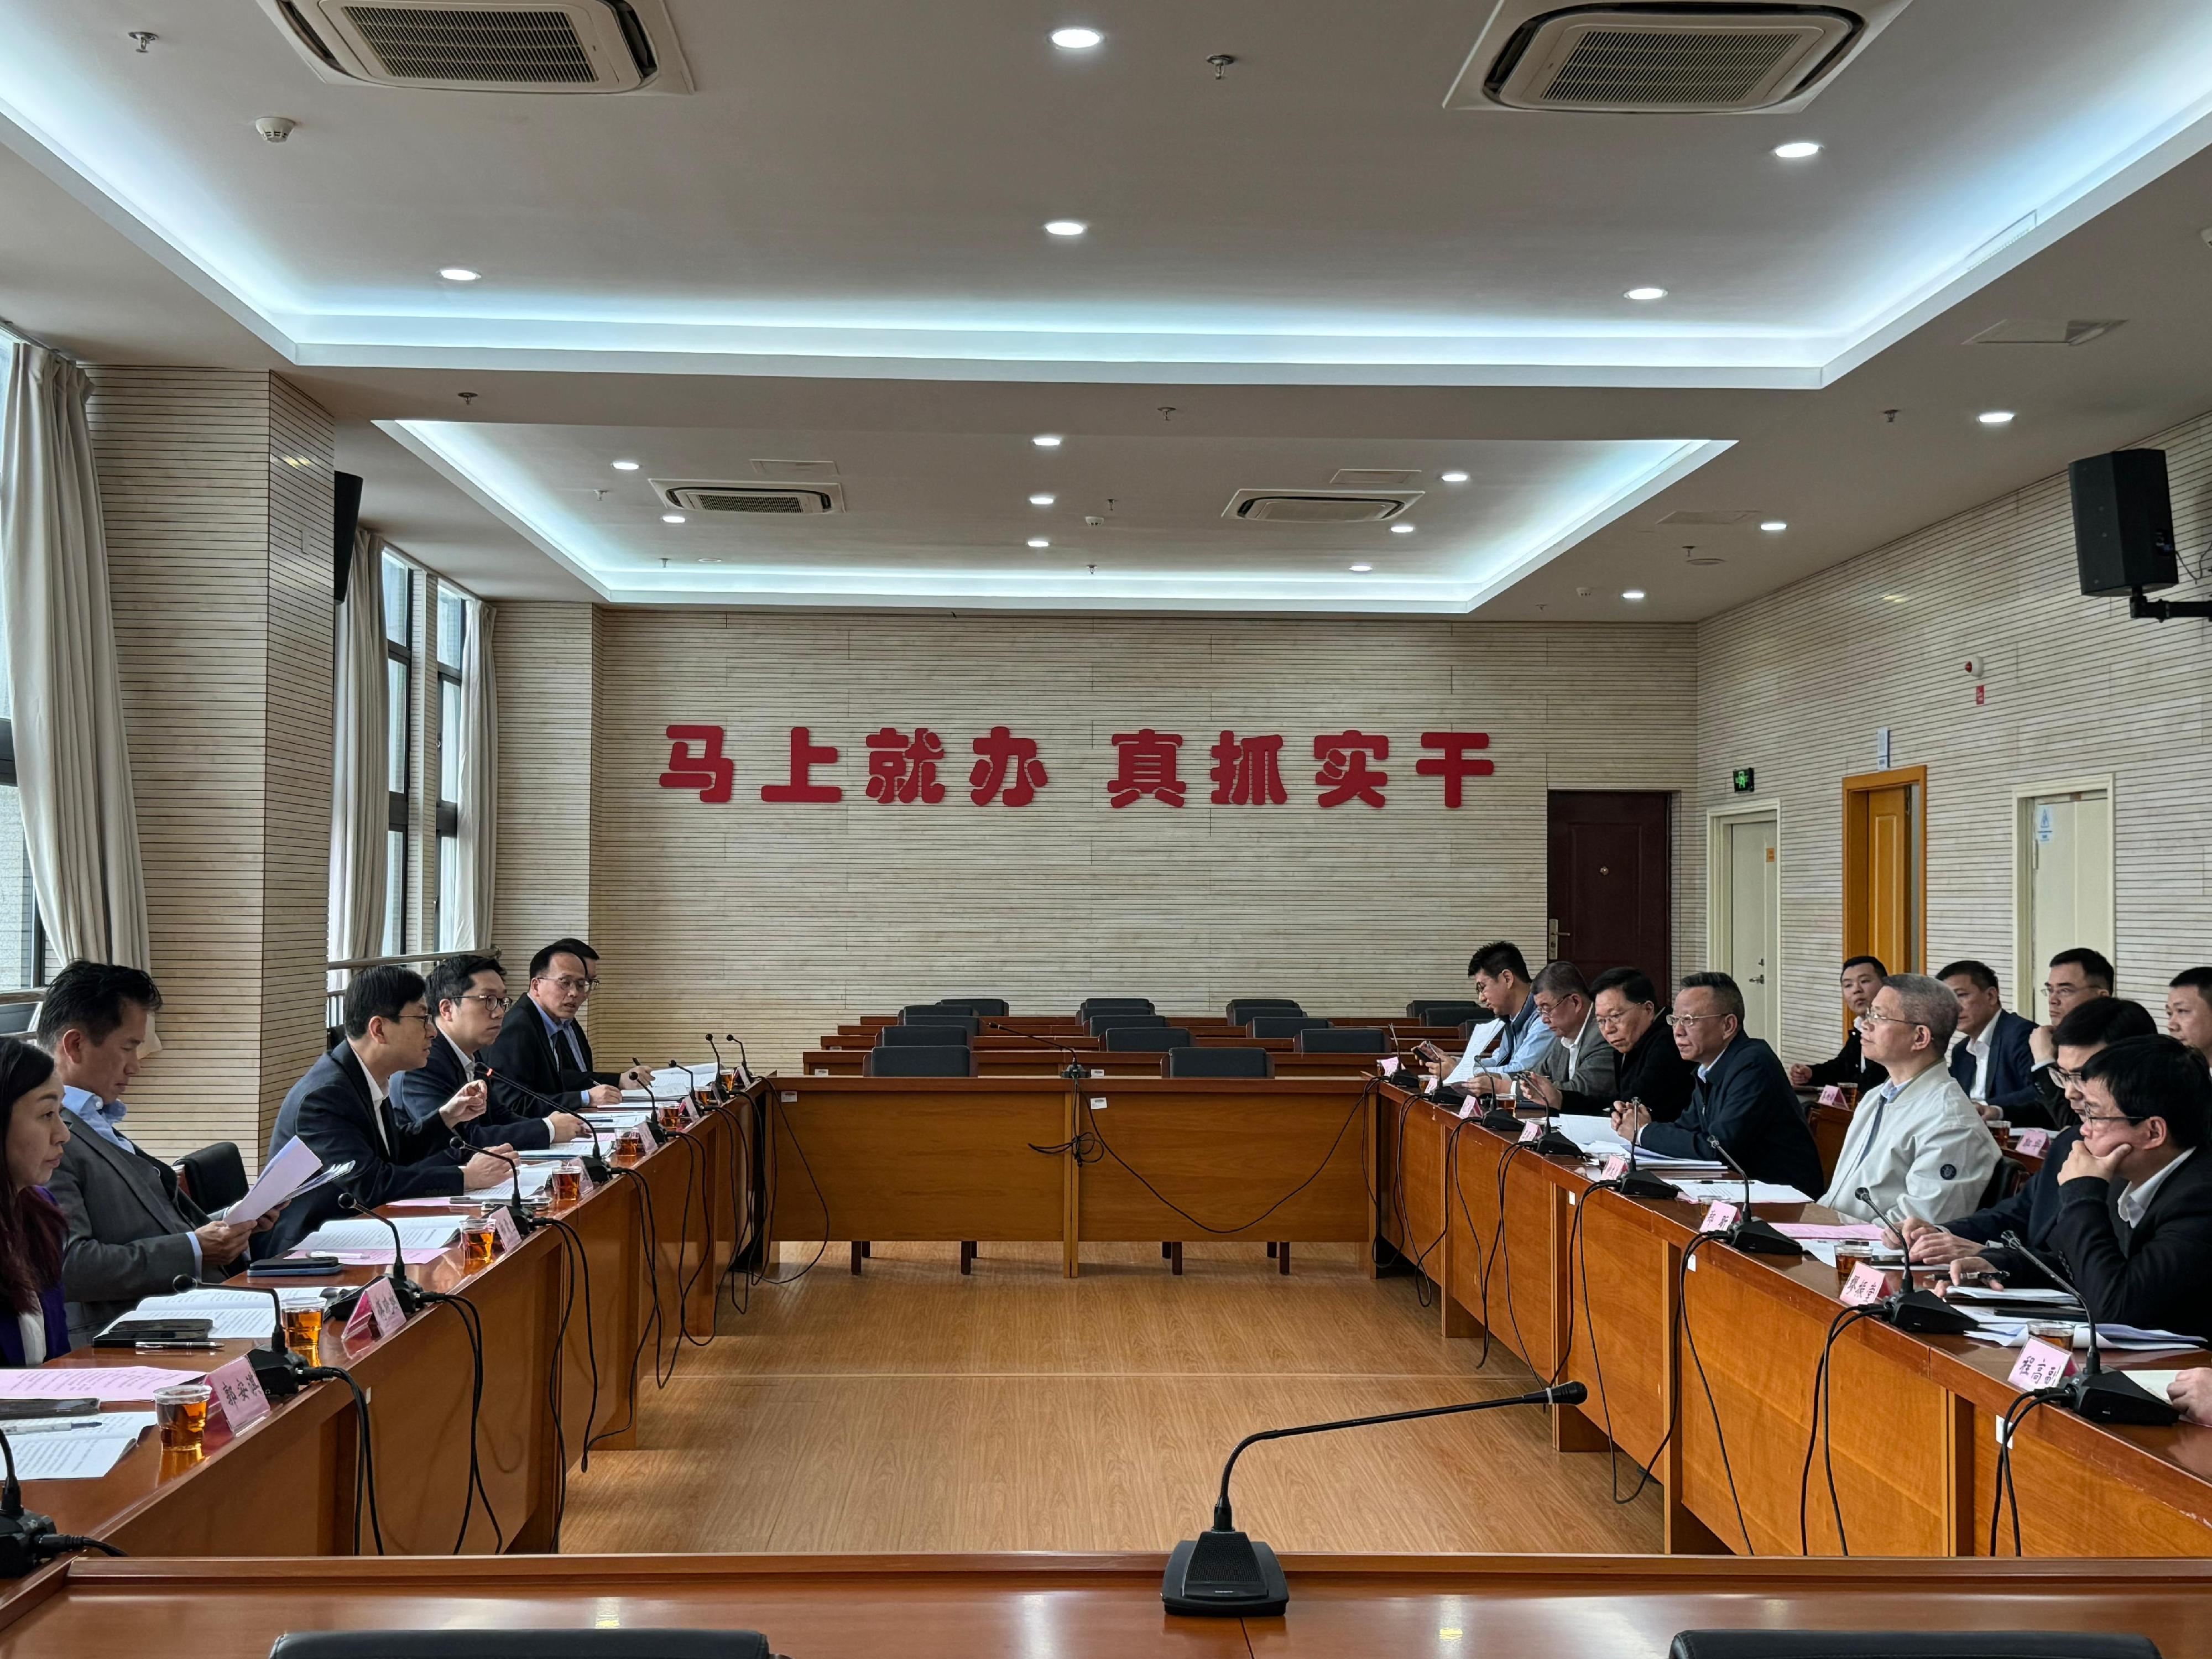 The Secretary for Labour and Welfare, Mr Chris Sun, today (March 4) started his visit to Fuzhou, Fujian. The Director of Hong Kong Talent Engage, Mr Anthony Lau, also joined the visit. Photo shows Mr Sun (third left) in a seminar this afternoon to get a better grasp of the practical experience of Fujian enterprises operating business on labour service co-operation with Hong Kong under various labour importation schemes.